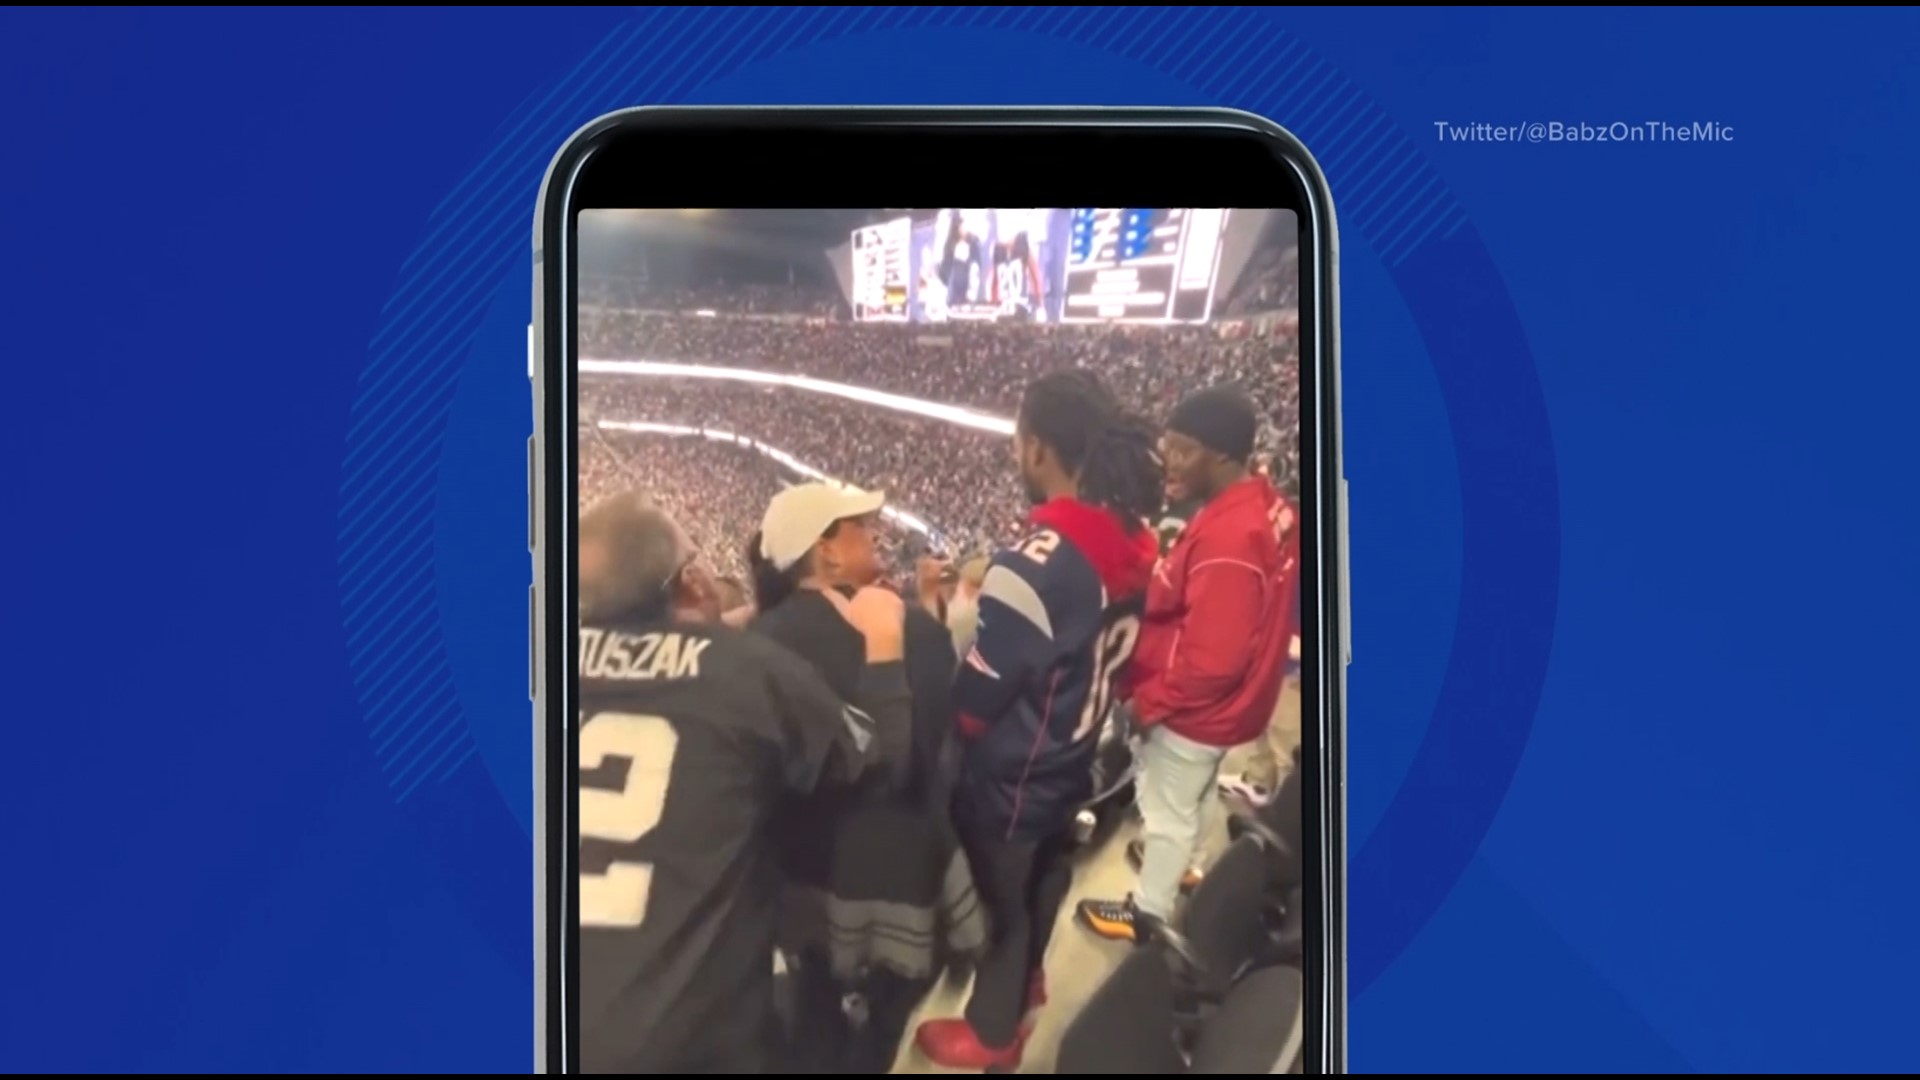 New England Patriots Fan Who Showed Incredible Restraint While Being  Berated By Raiders Fan, Gets Free Tickets To Next Pats Game